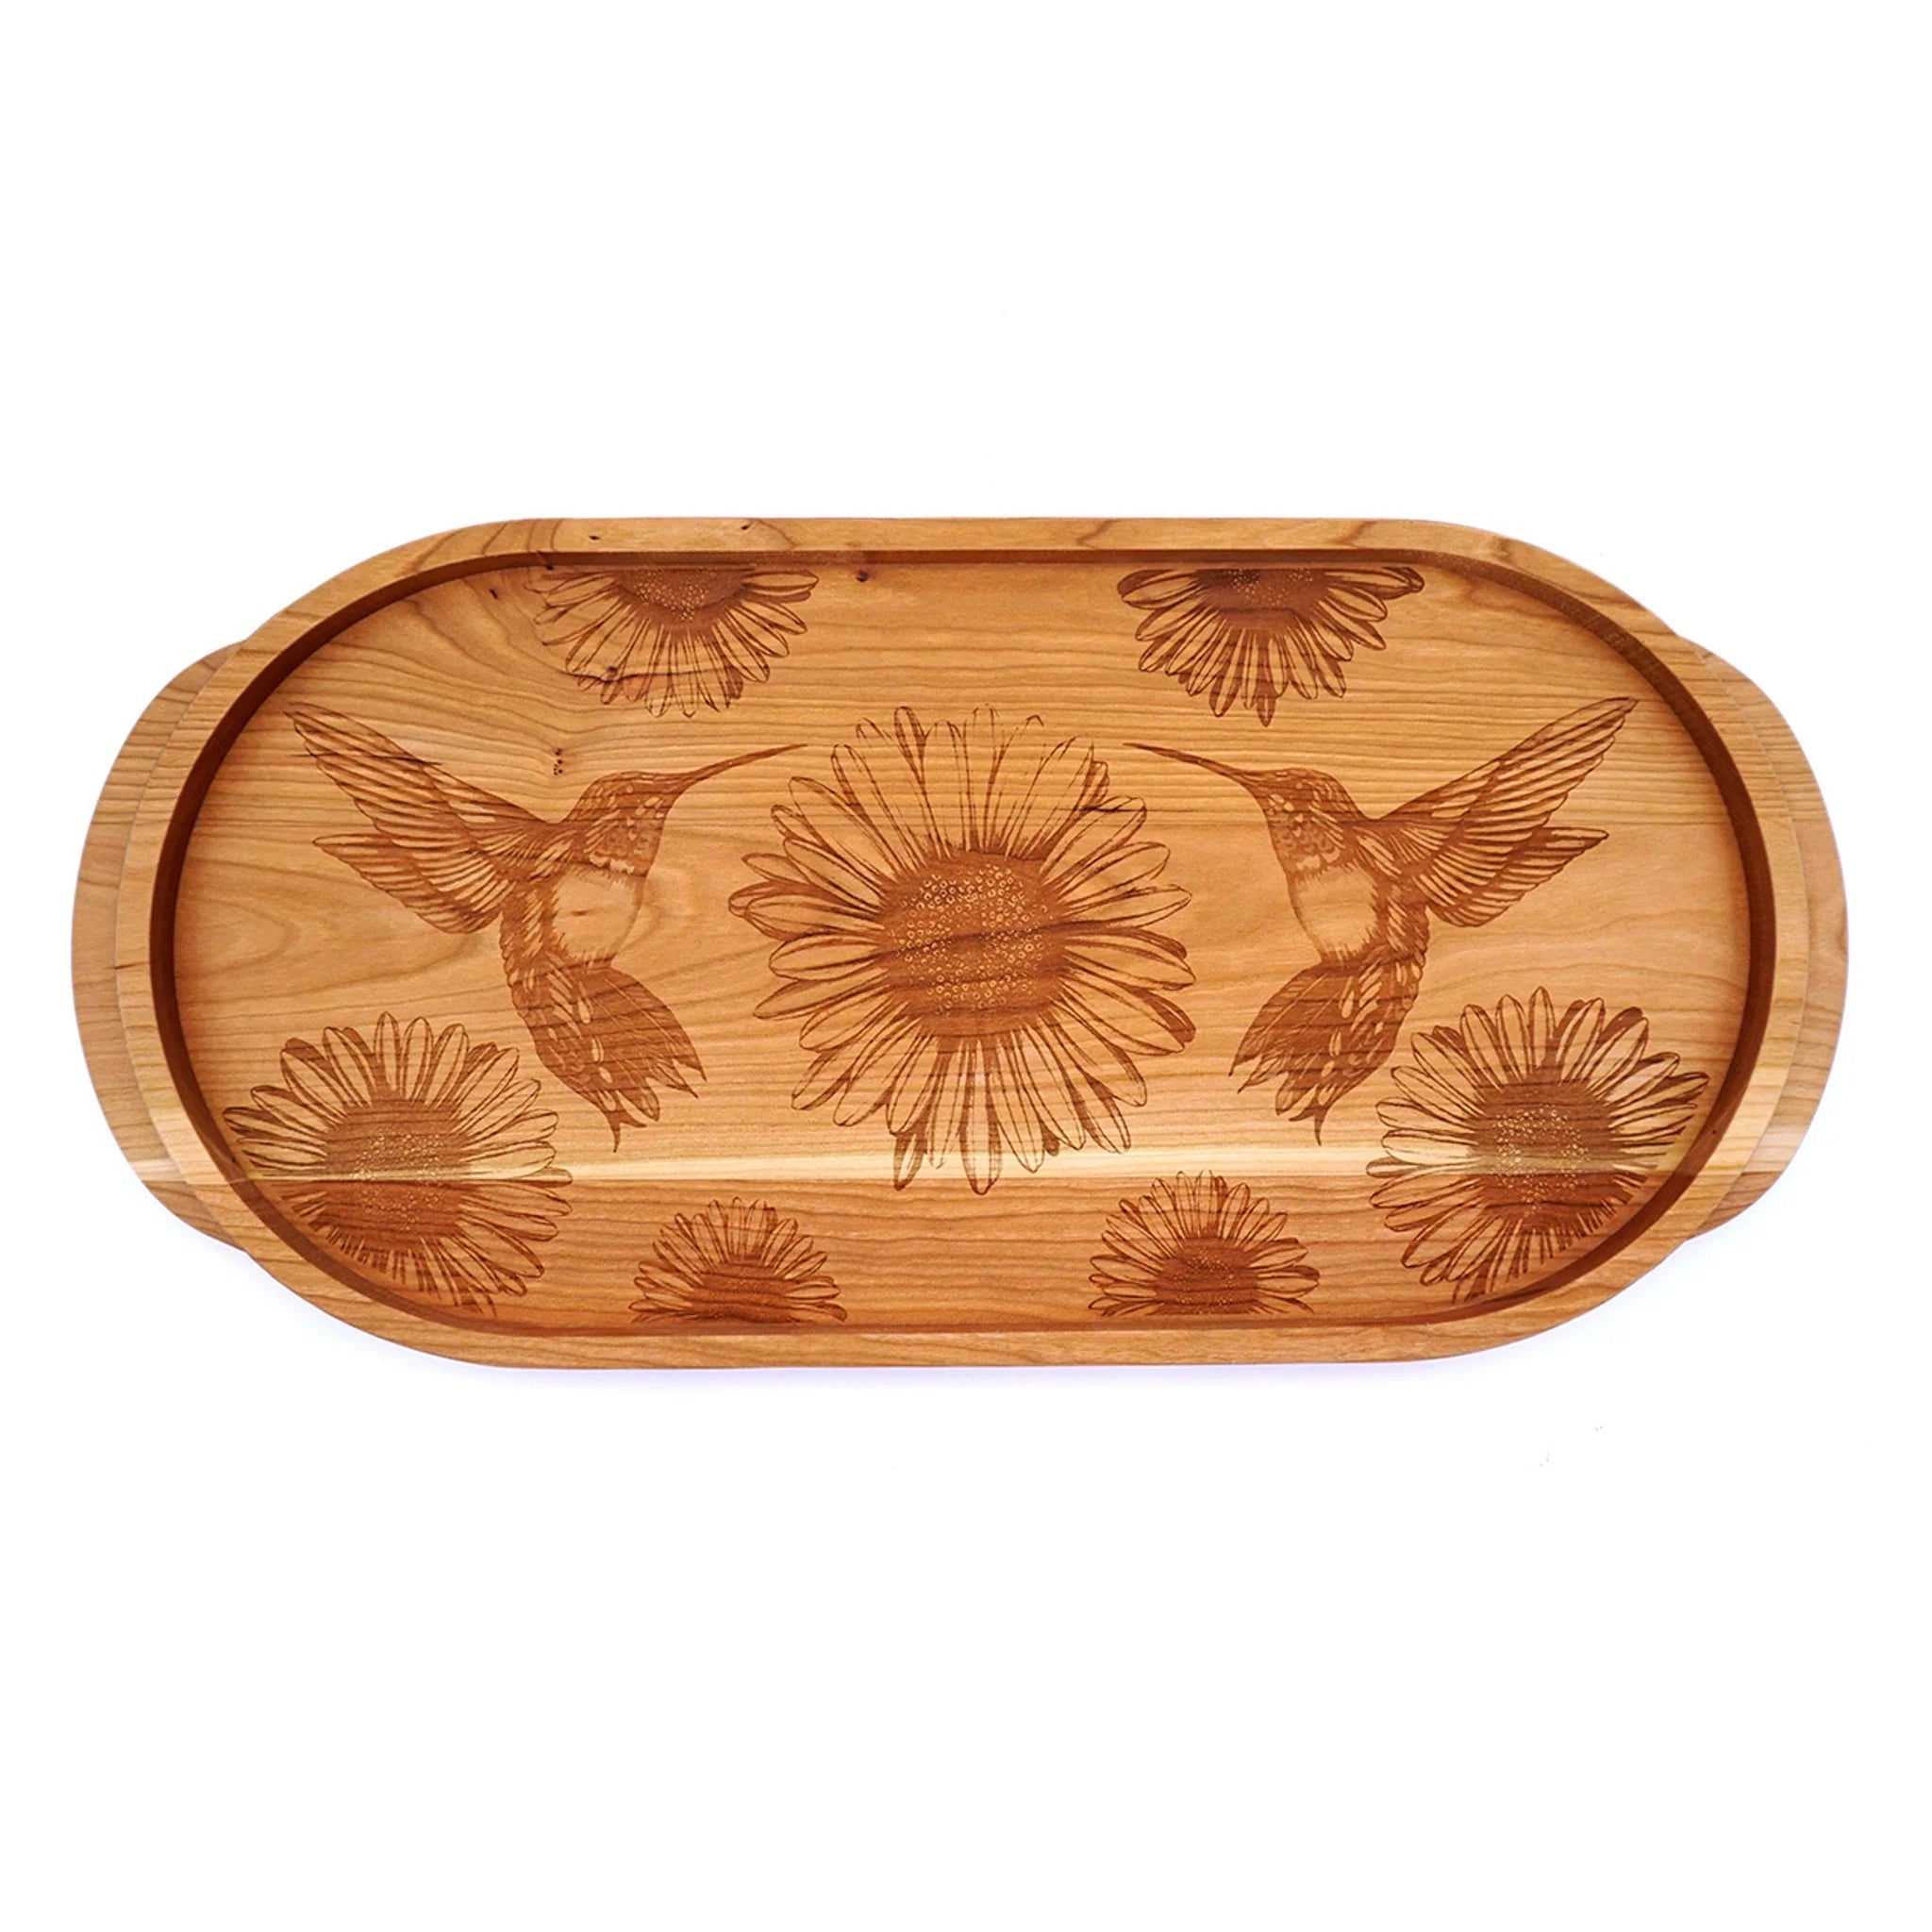 Laura Zindel Cherry Oval Wooden Serving Tray, Multiple Designs